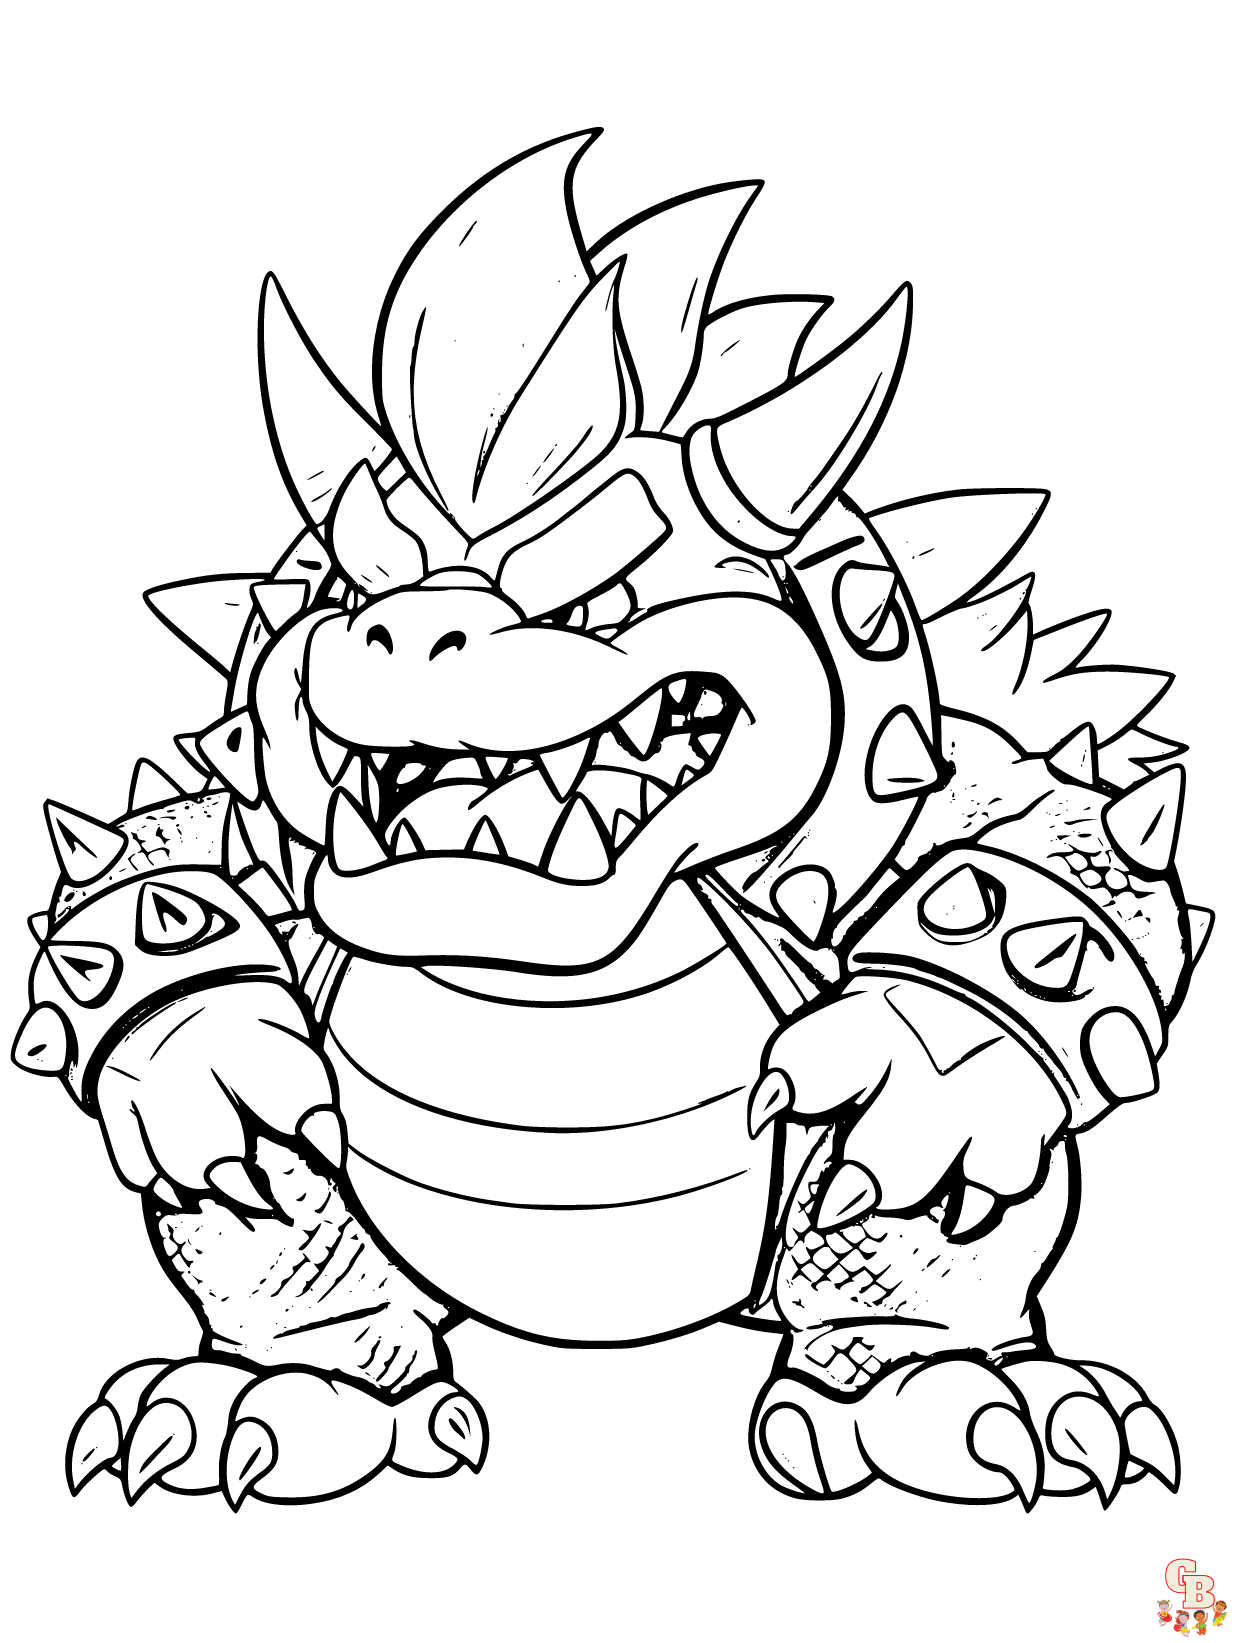 Bowser coloring pages easy